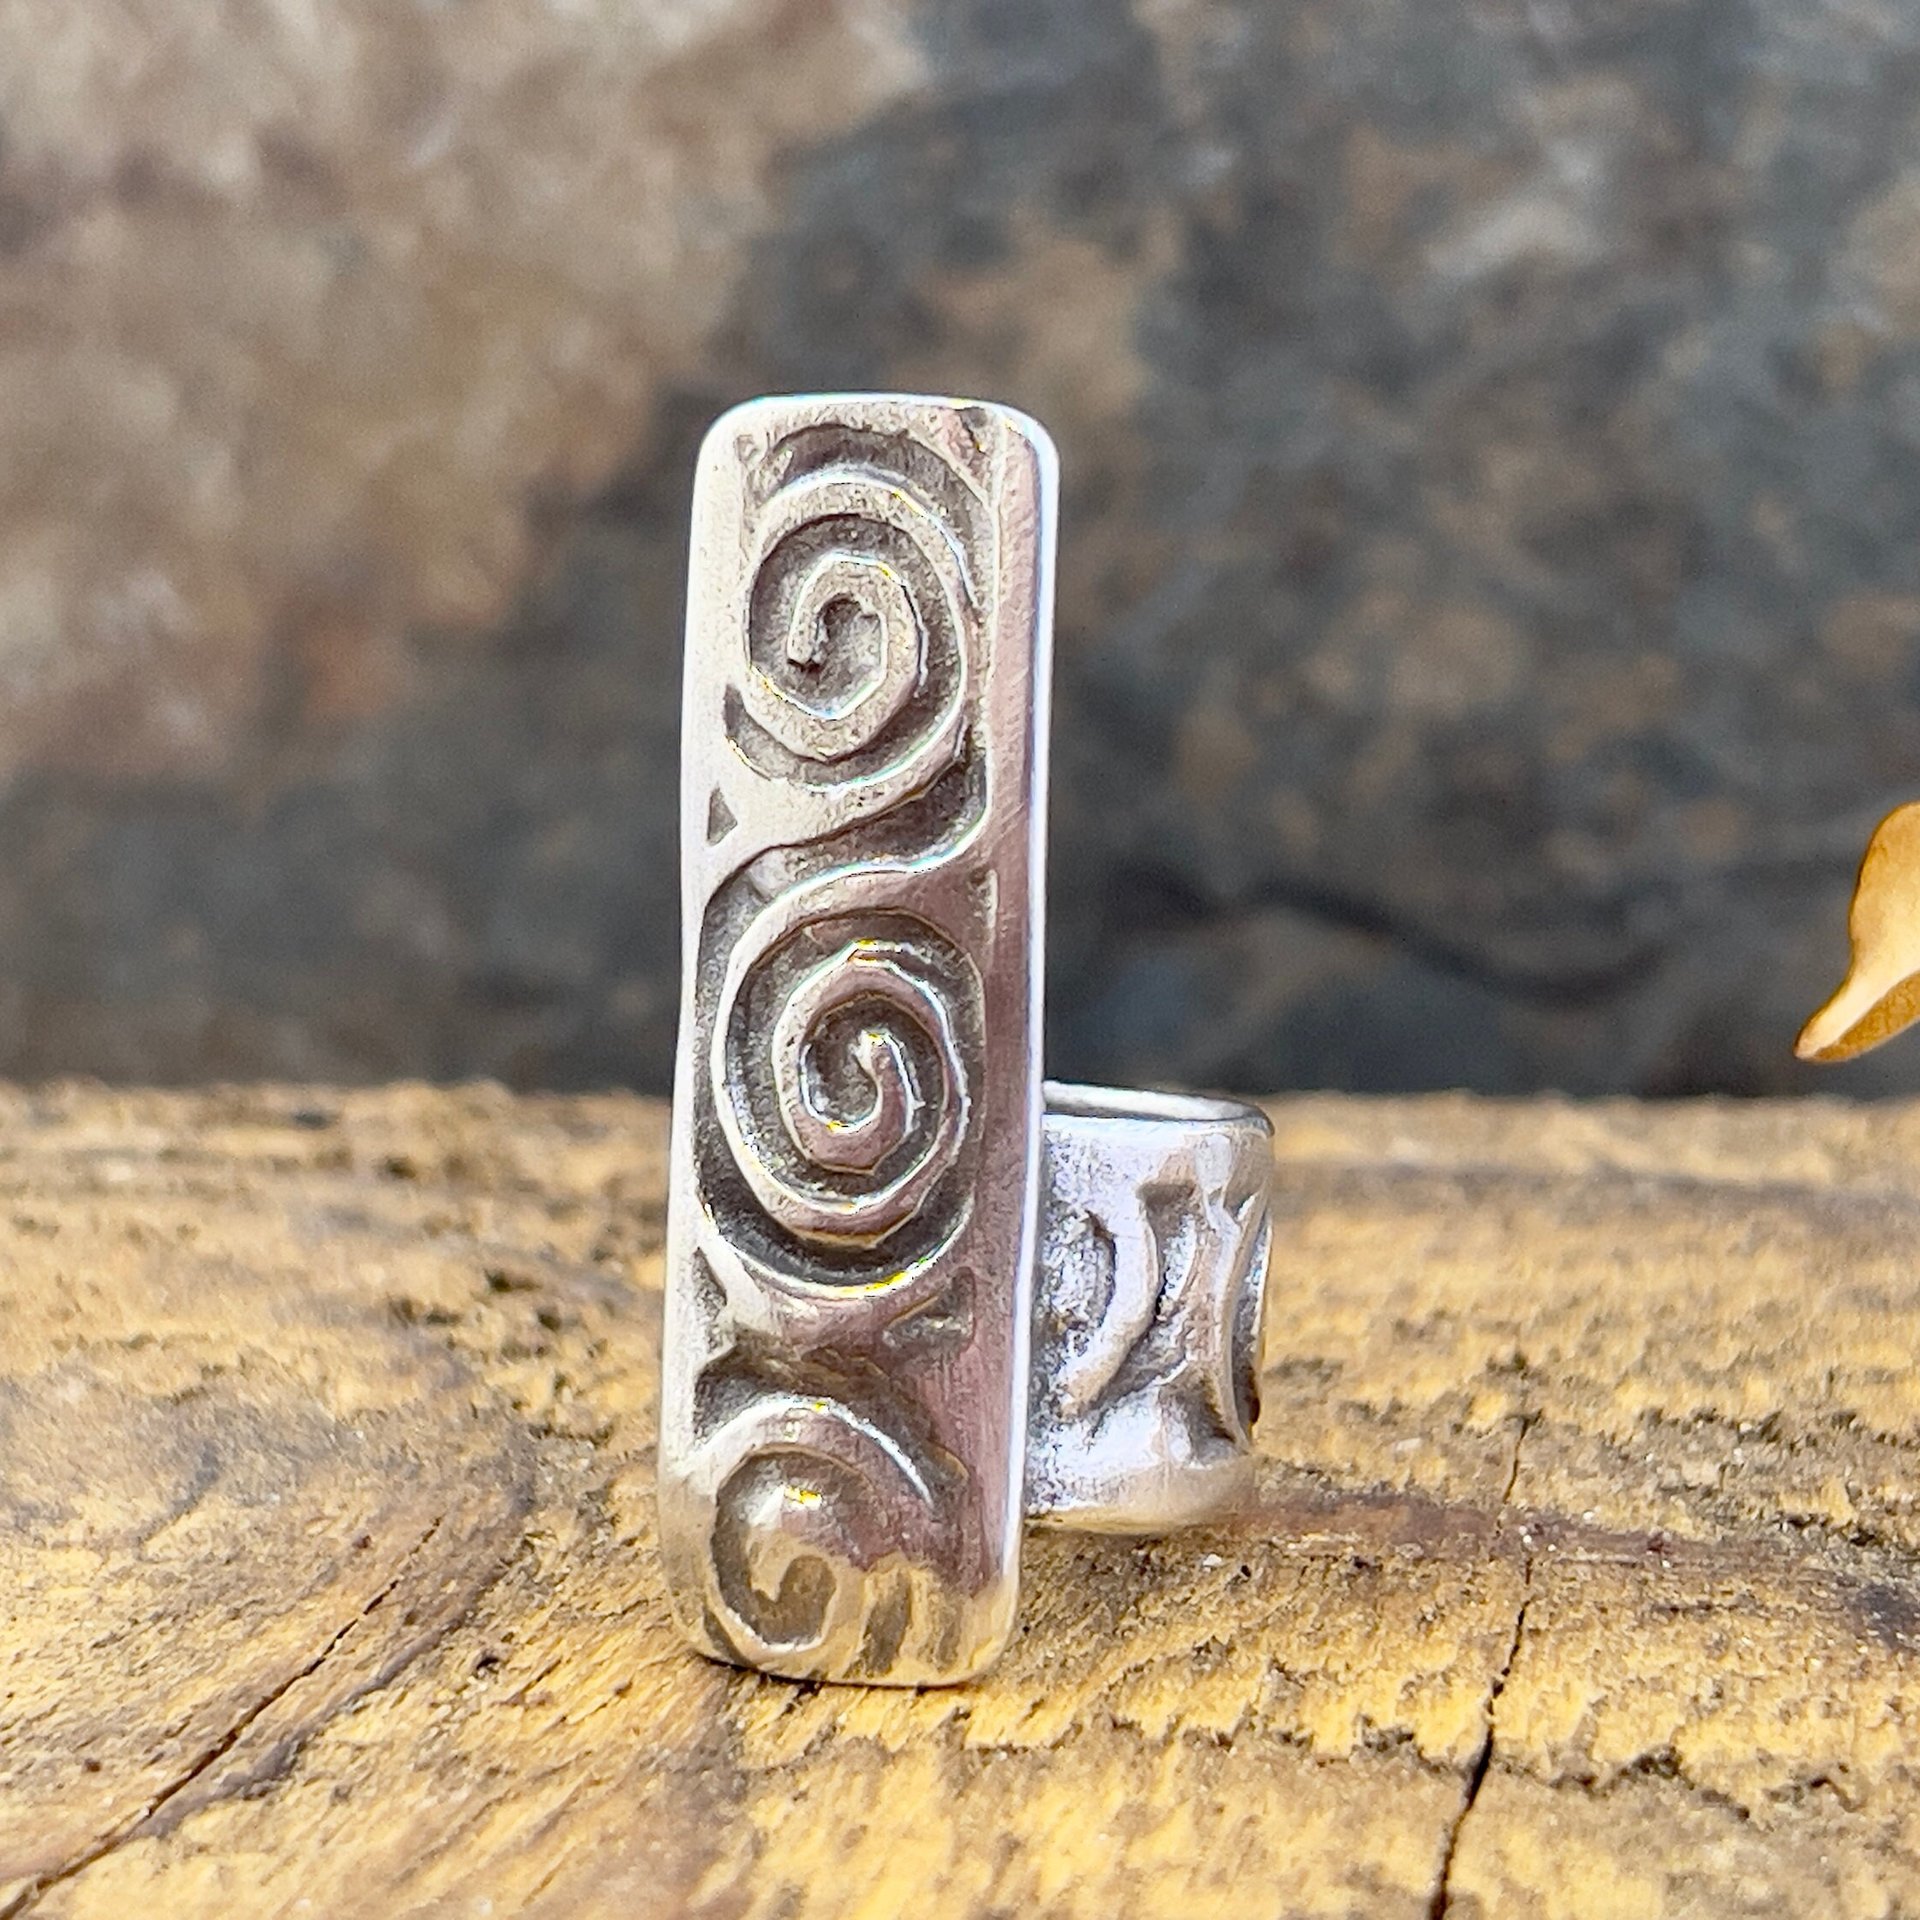 Silver Spiral Ring, Sterling Silver 960, Irish Celtic Spirals, Shied Ring, Statement Jewelry, Druid Pagan, Earthy Rustic Jewelry, Eternity